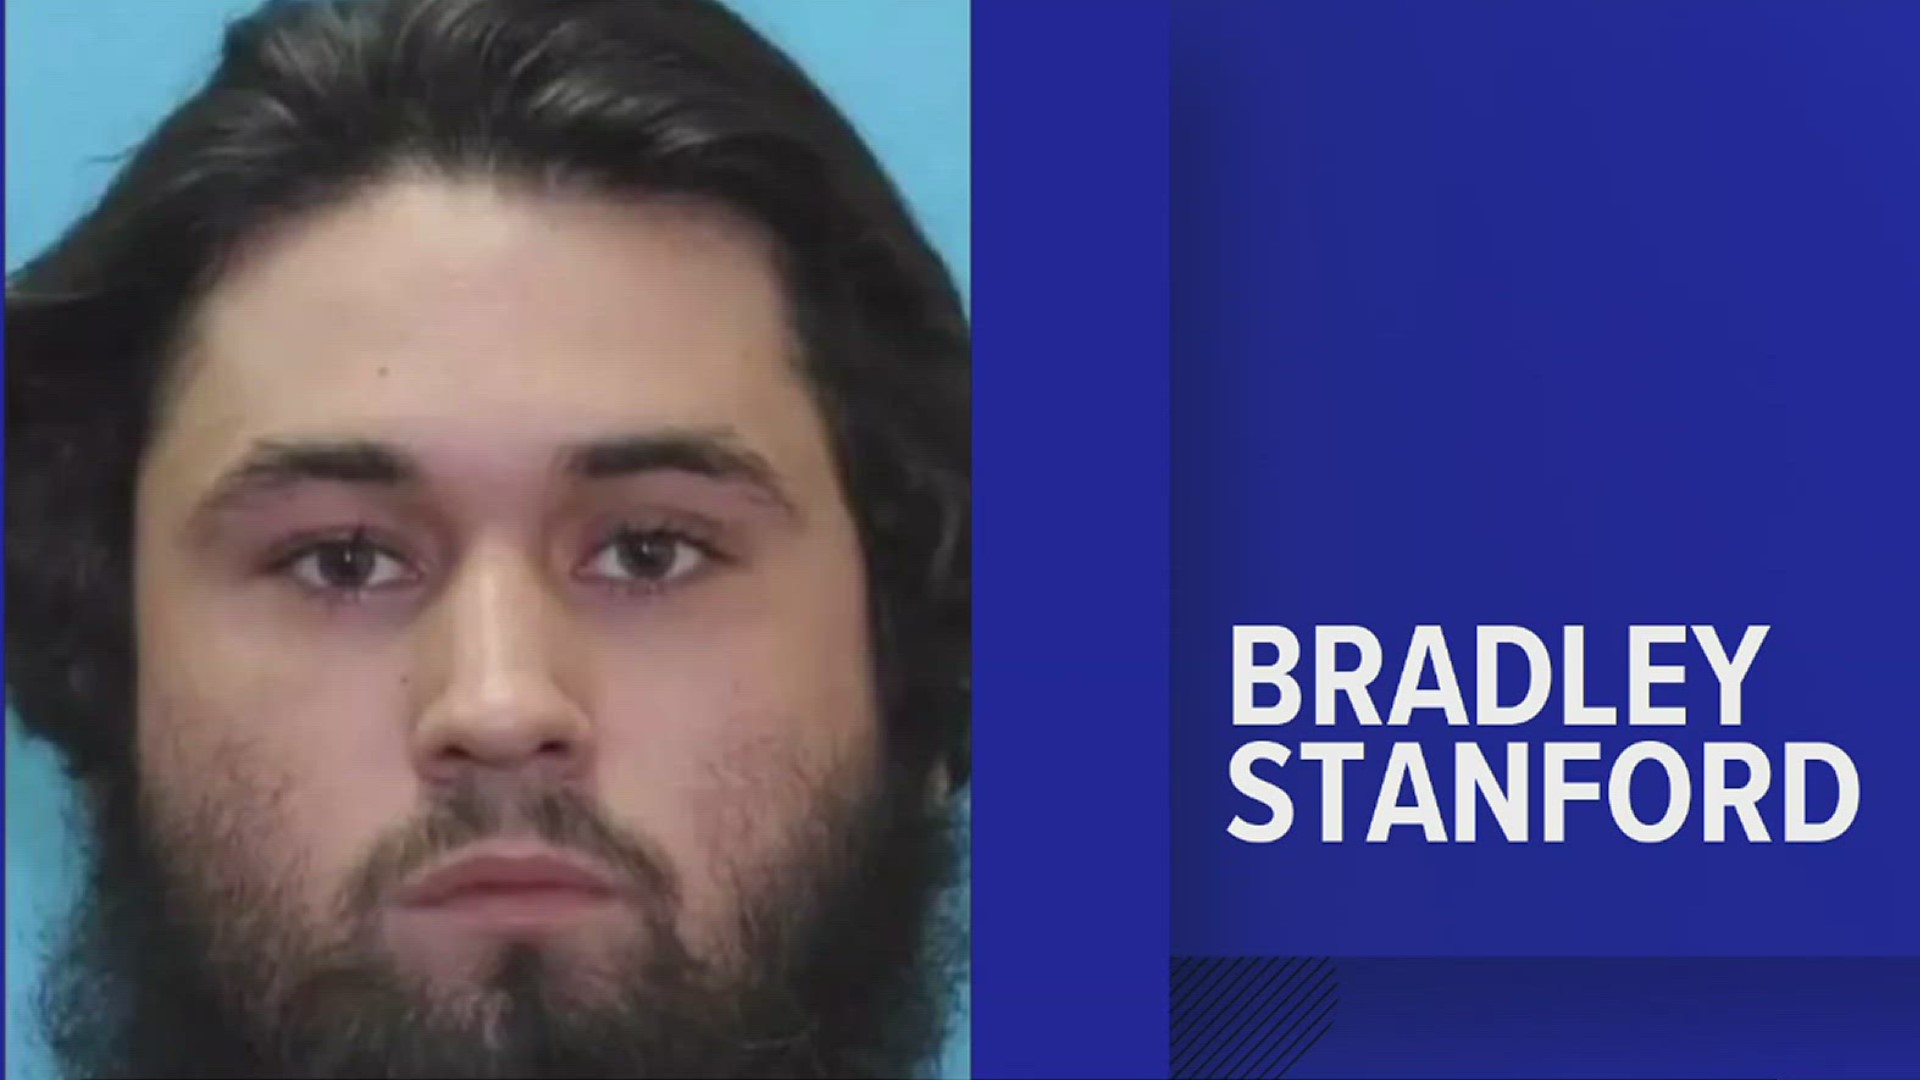 23-year-old, Bradley Stanford is being booked into the San Patricio County Jail, awaiting to be extradited back to Williamson County.